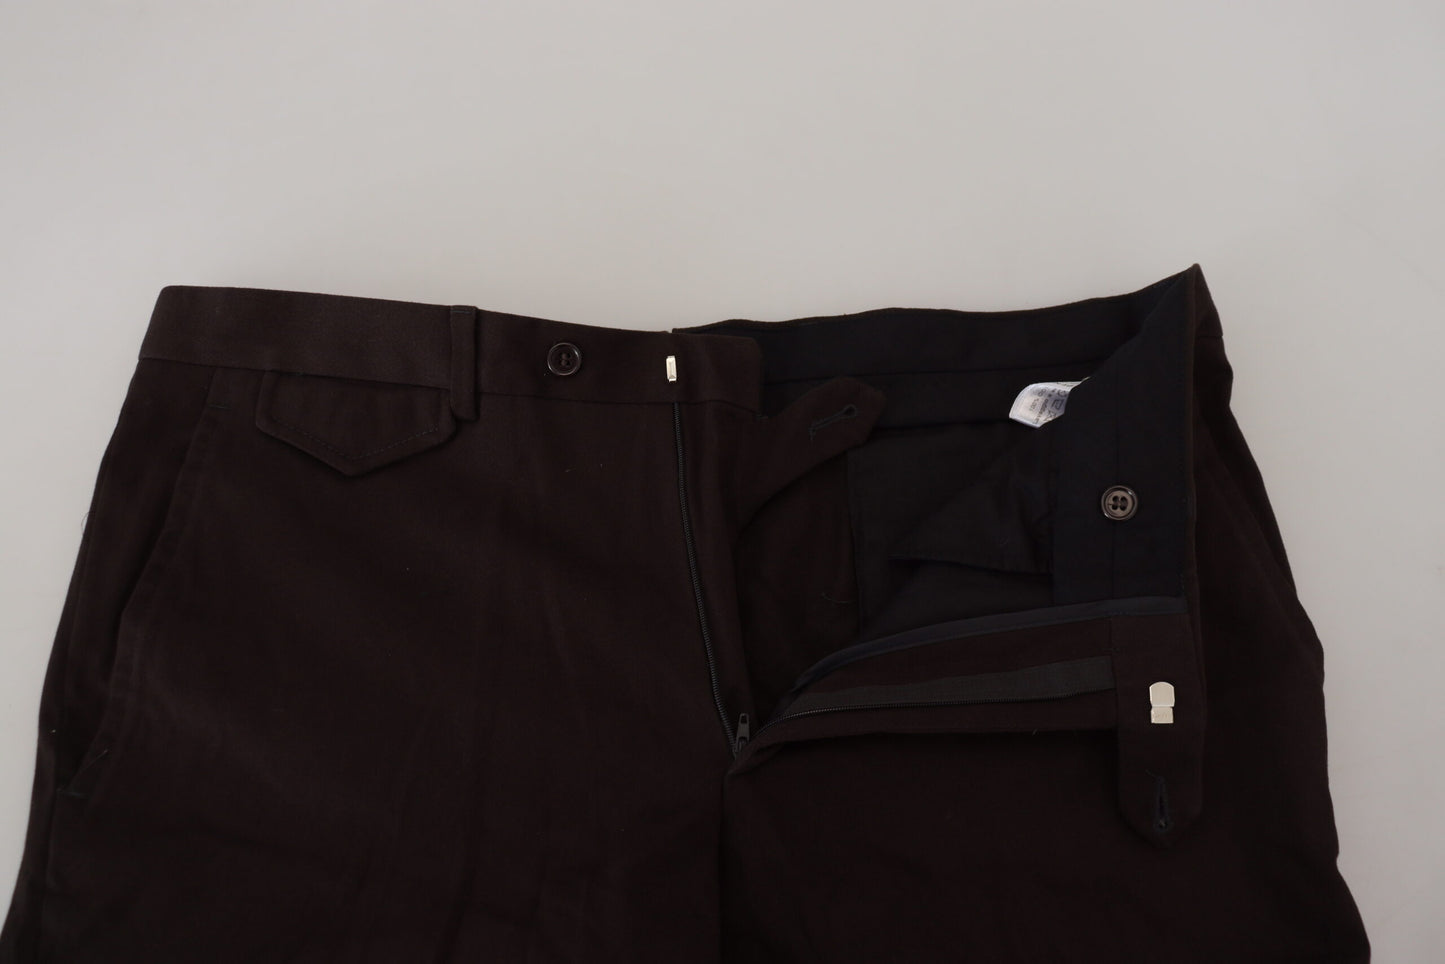 Elegant Brown Cotton Pants for Sophisticated Style